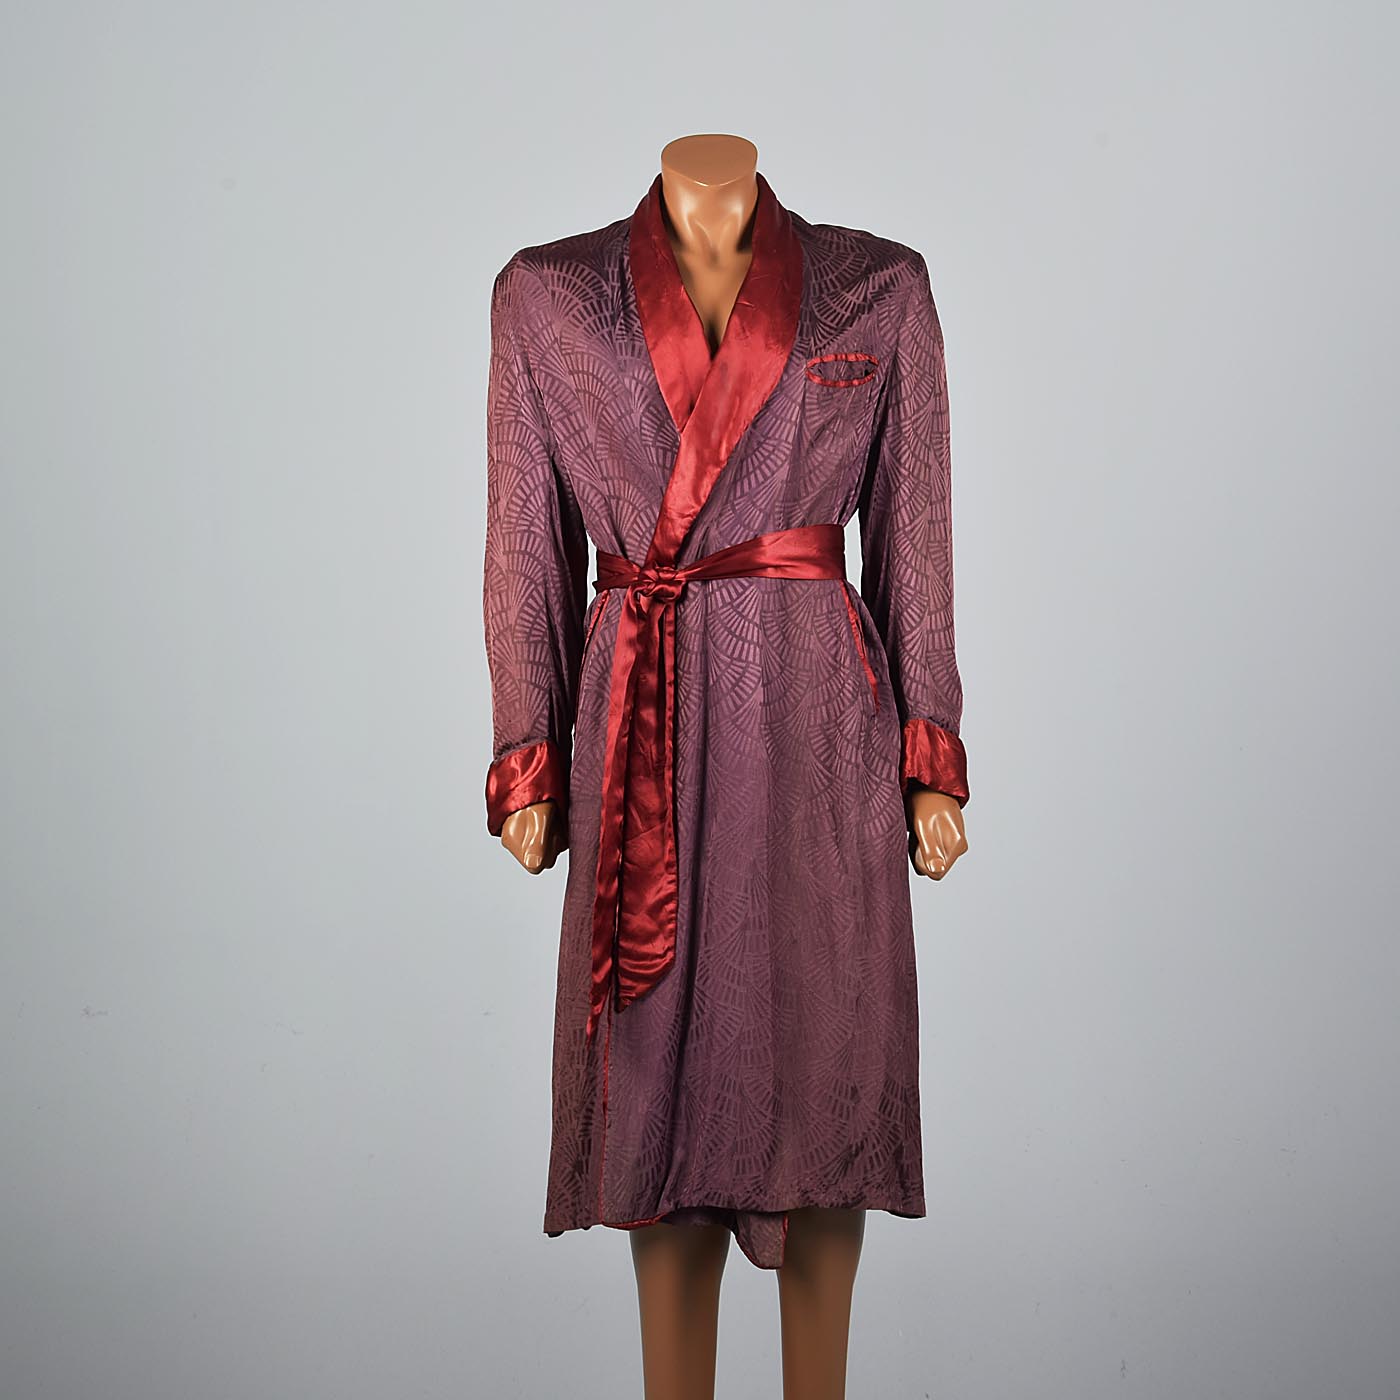 1940s Mens Rayon Robe with Art Deco Pattern